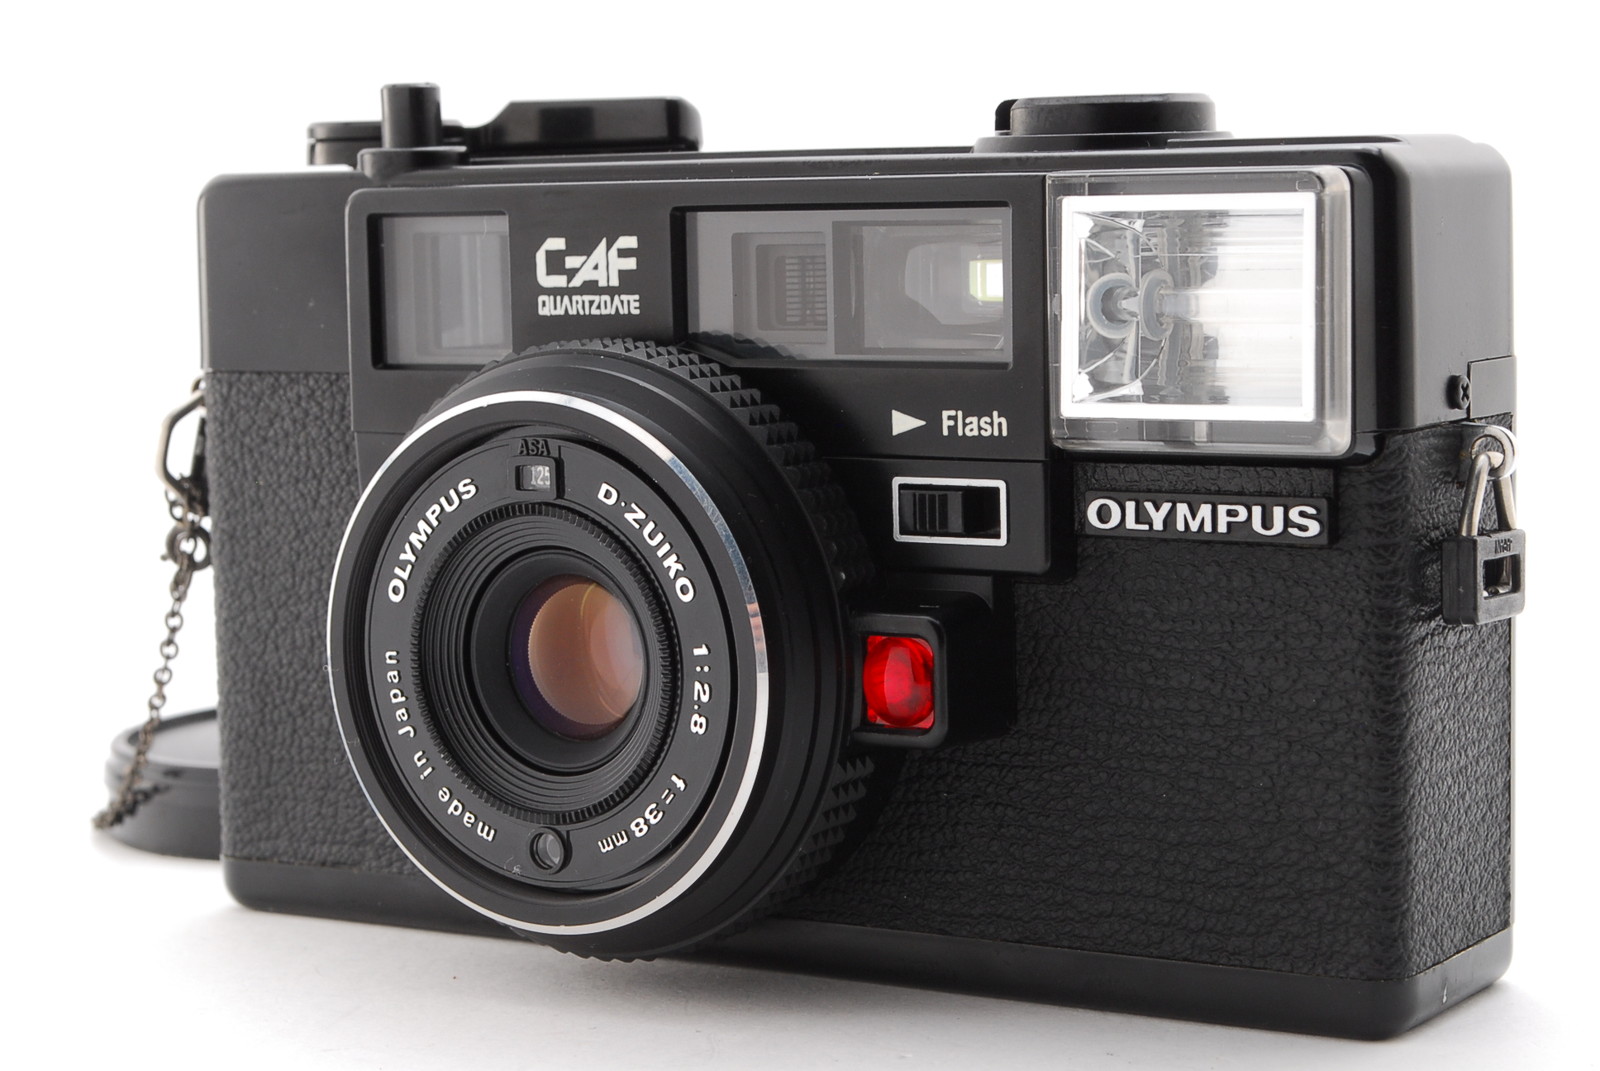 PROMOTION. EXC+++++ Olympus C-AF QUARTZ DATE 35mm Film Point and Shoot Camera, Front Cap from Japan